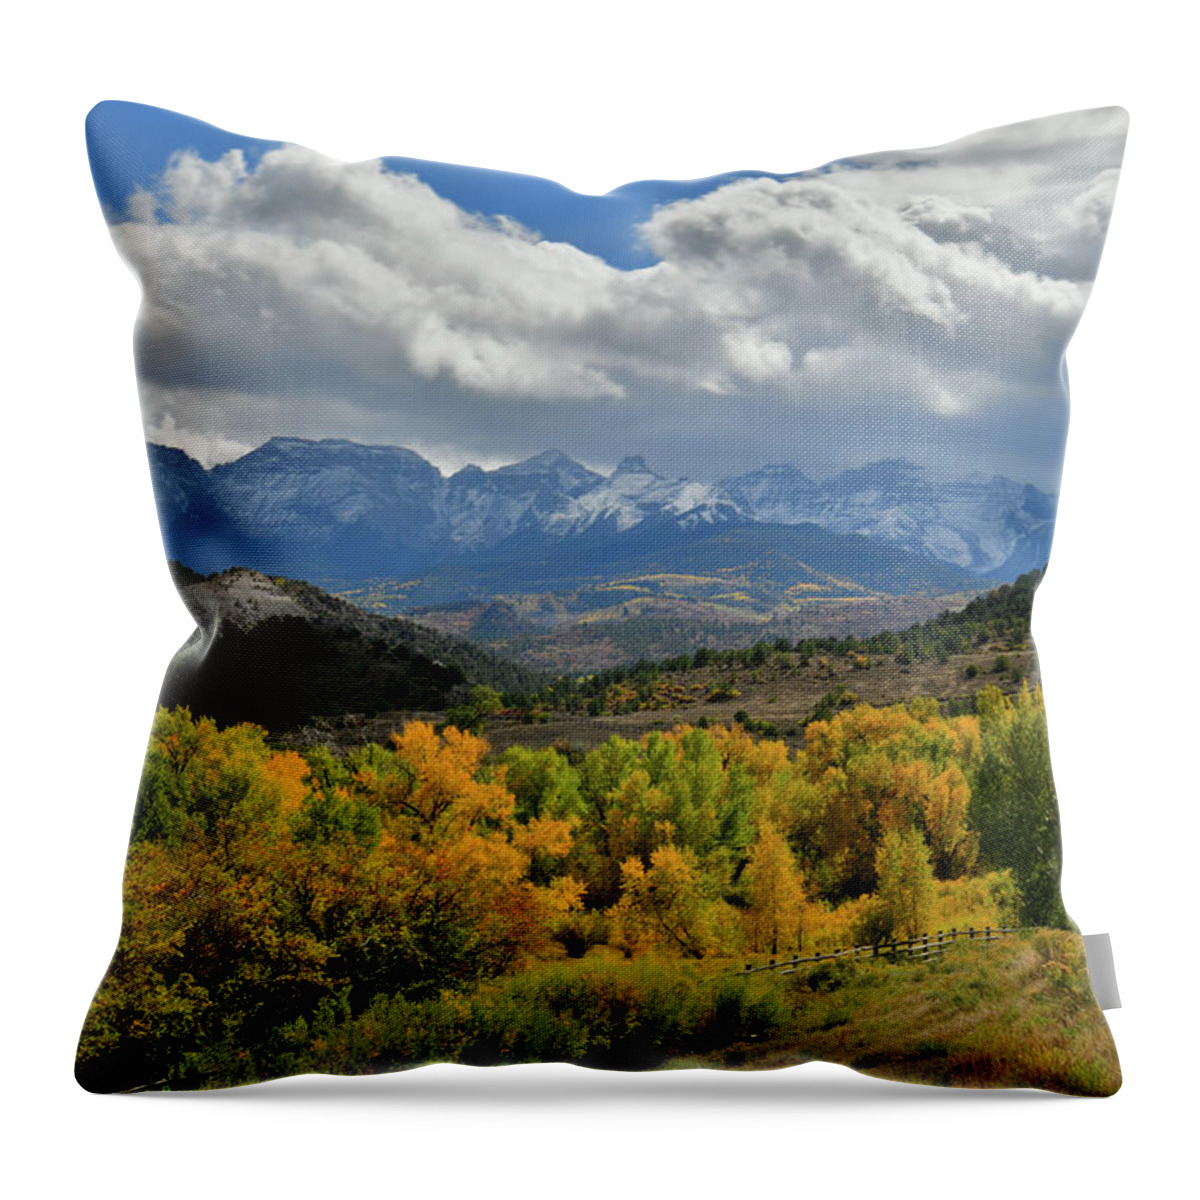 Highway 145 Throw Pillow featuring the photograph Clouds Over Mt. Sneffels Seen From Highway 62 by Ray Mathis